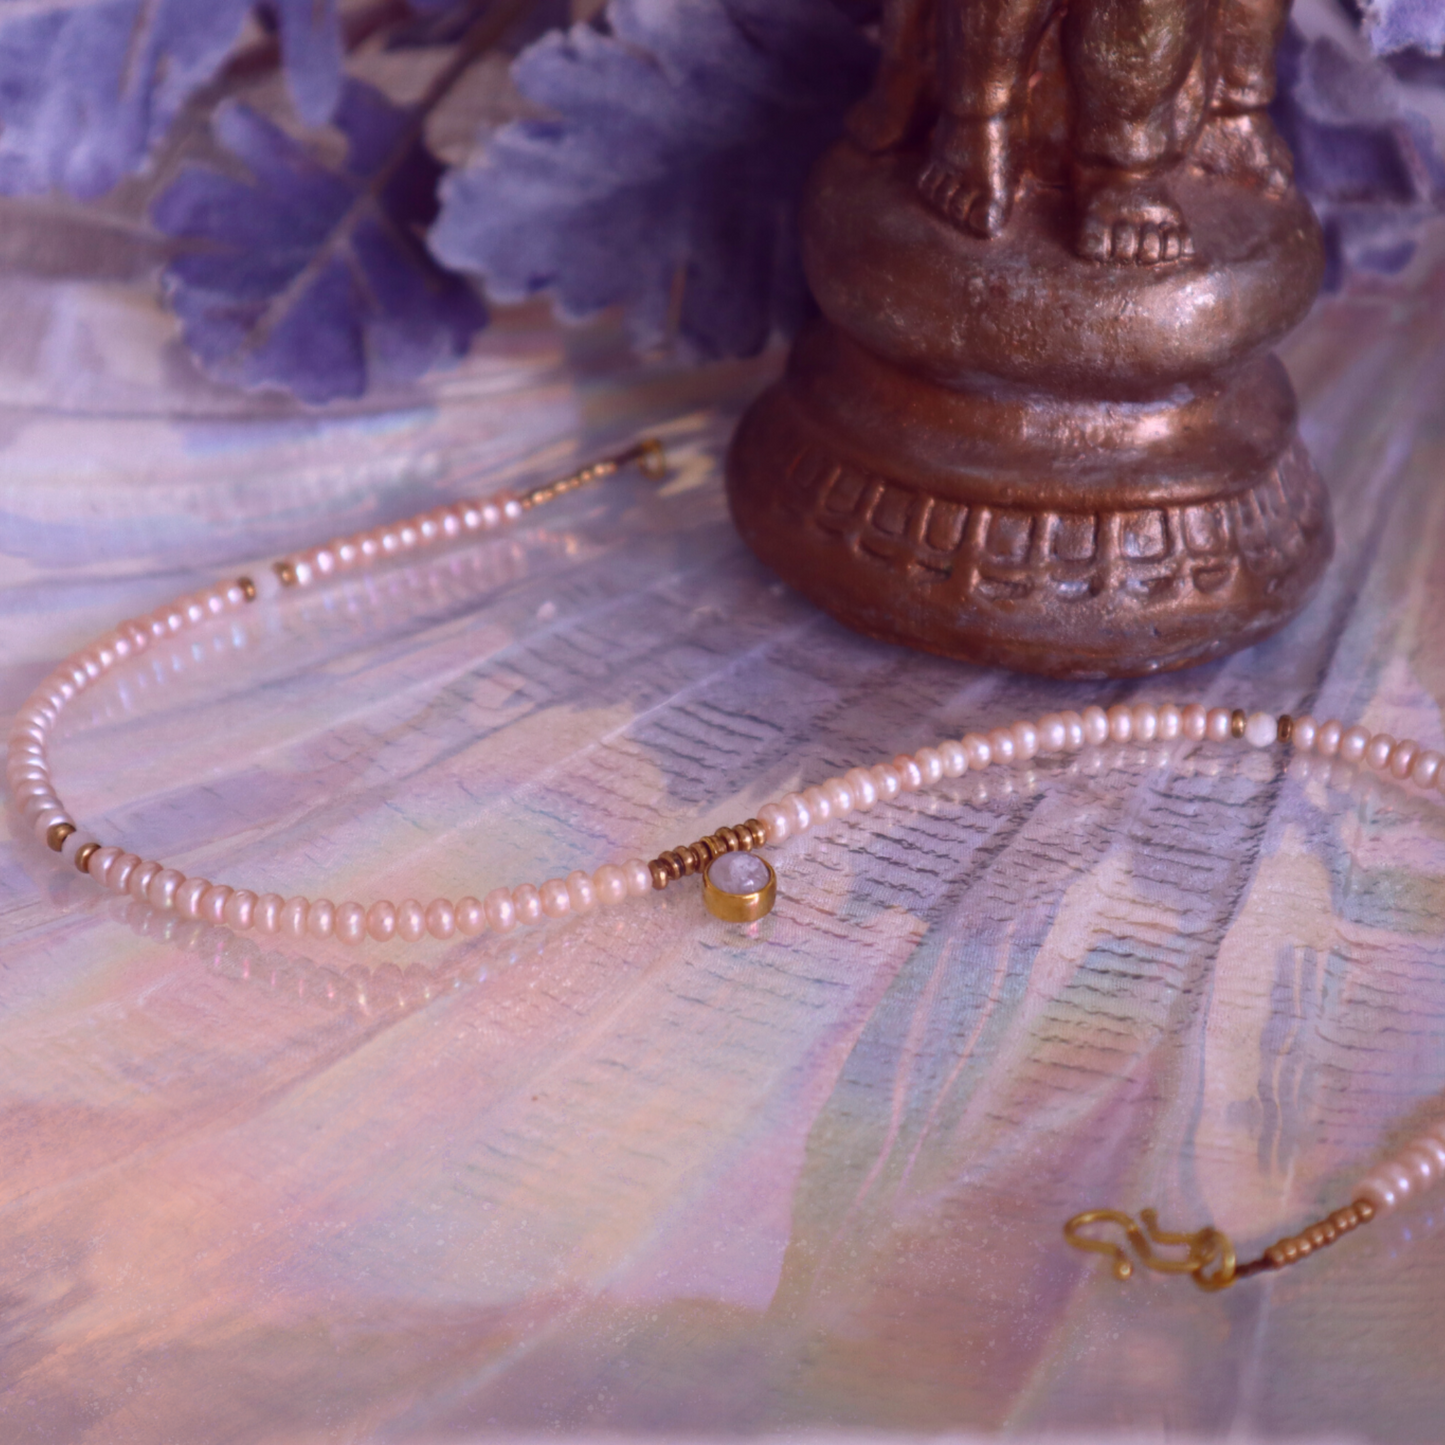 Pearl Choker With A Tiny Moonstone